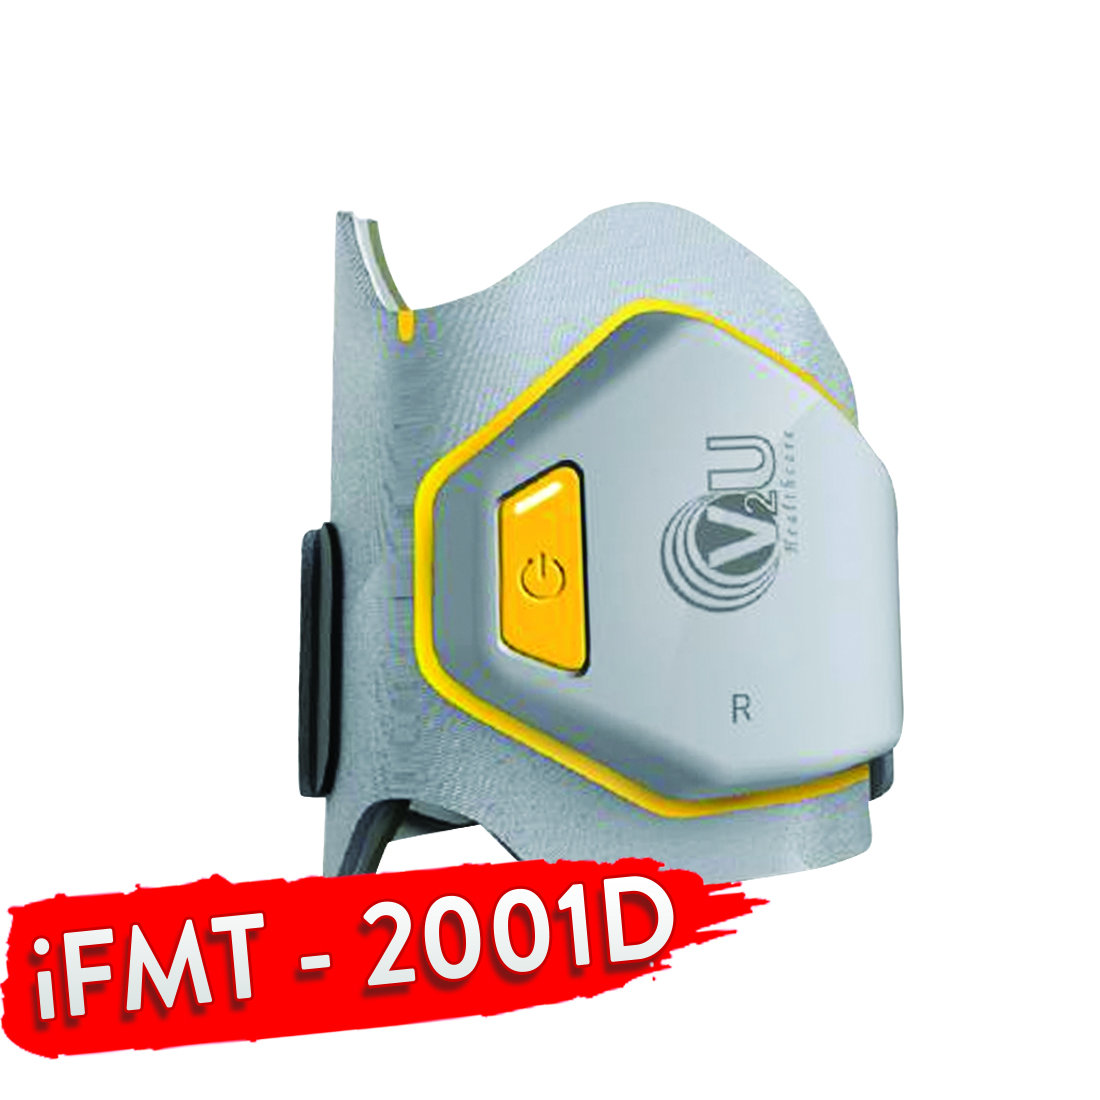 iFMD-2001D Intelligent Foot Muscle Trainer - Fitness Equipment